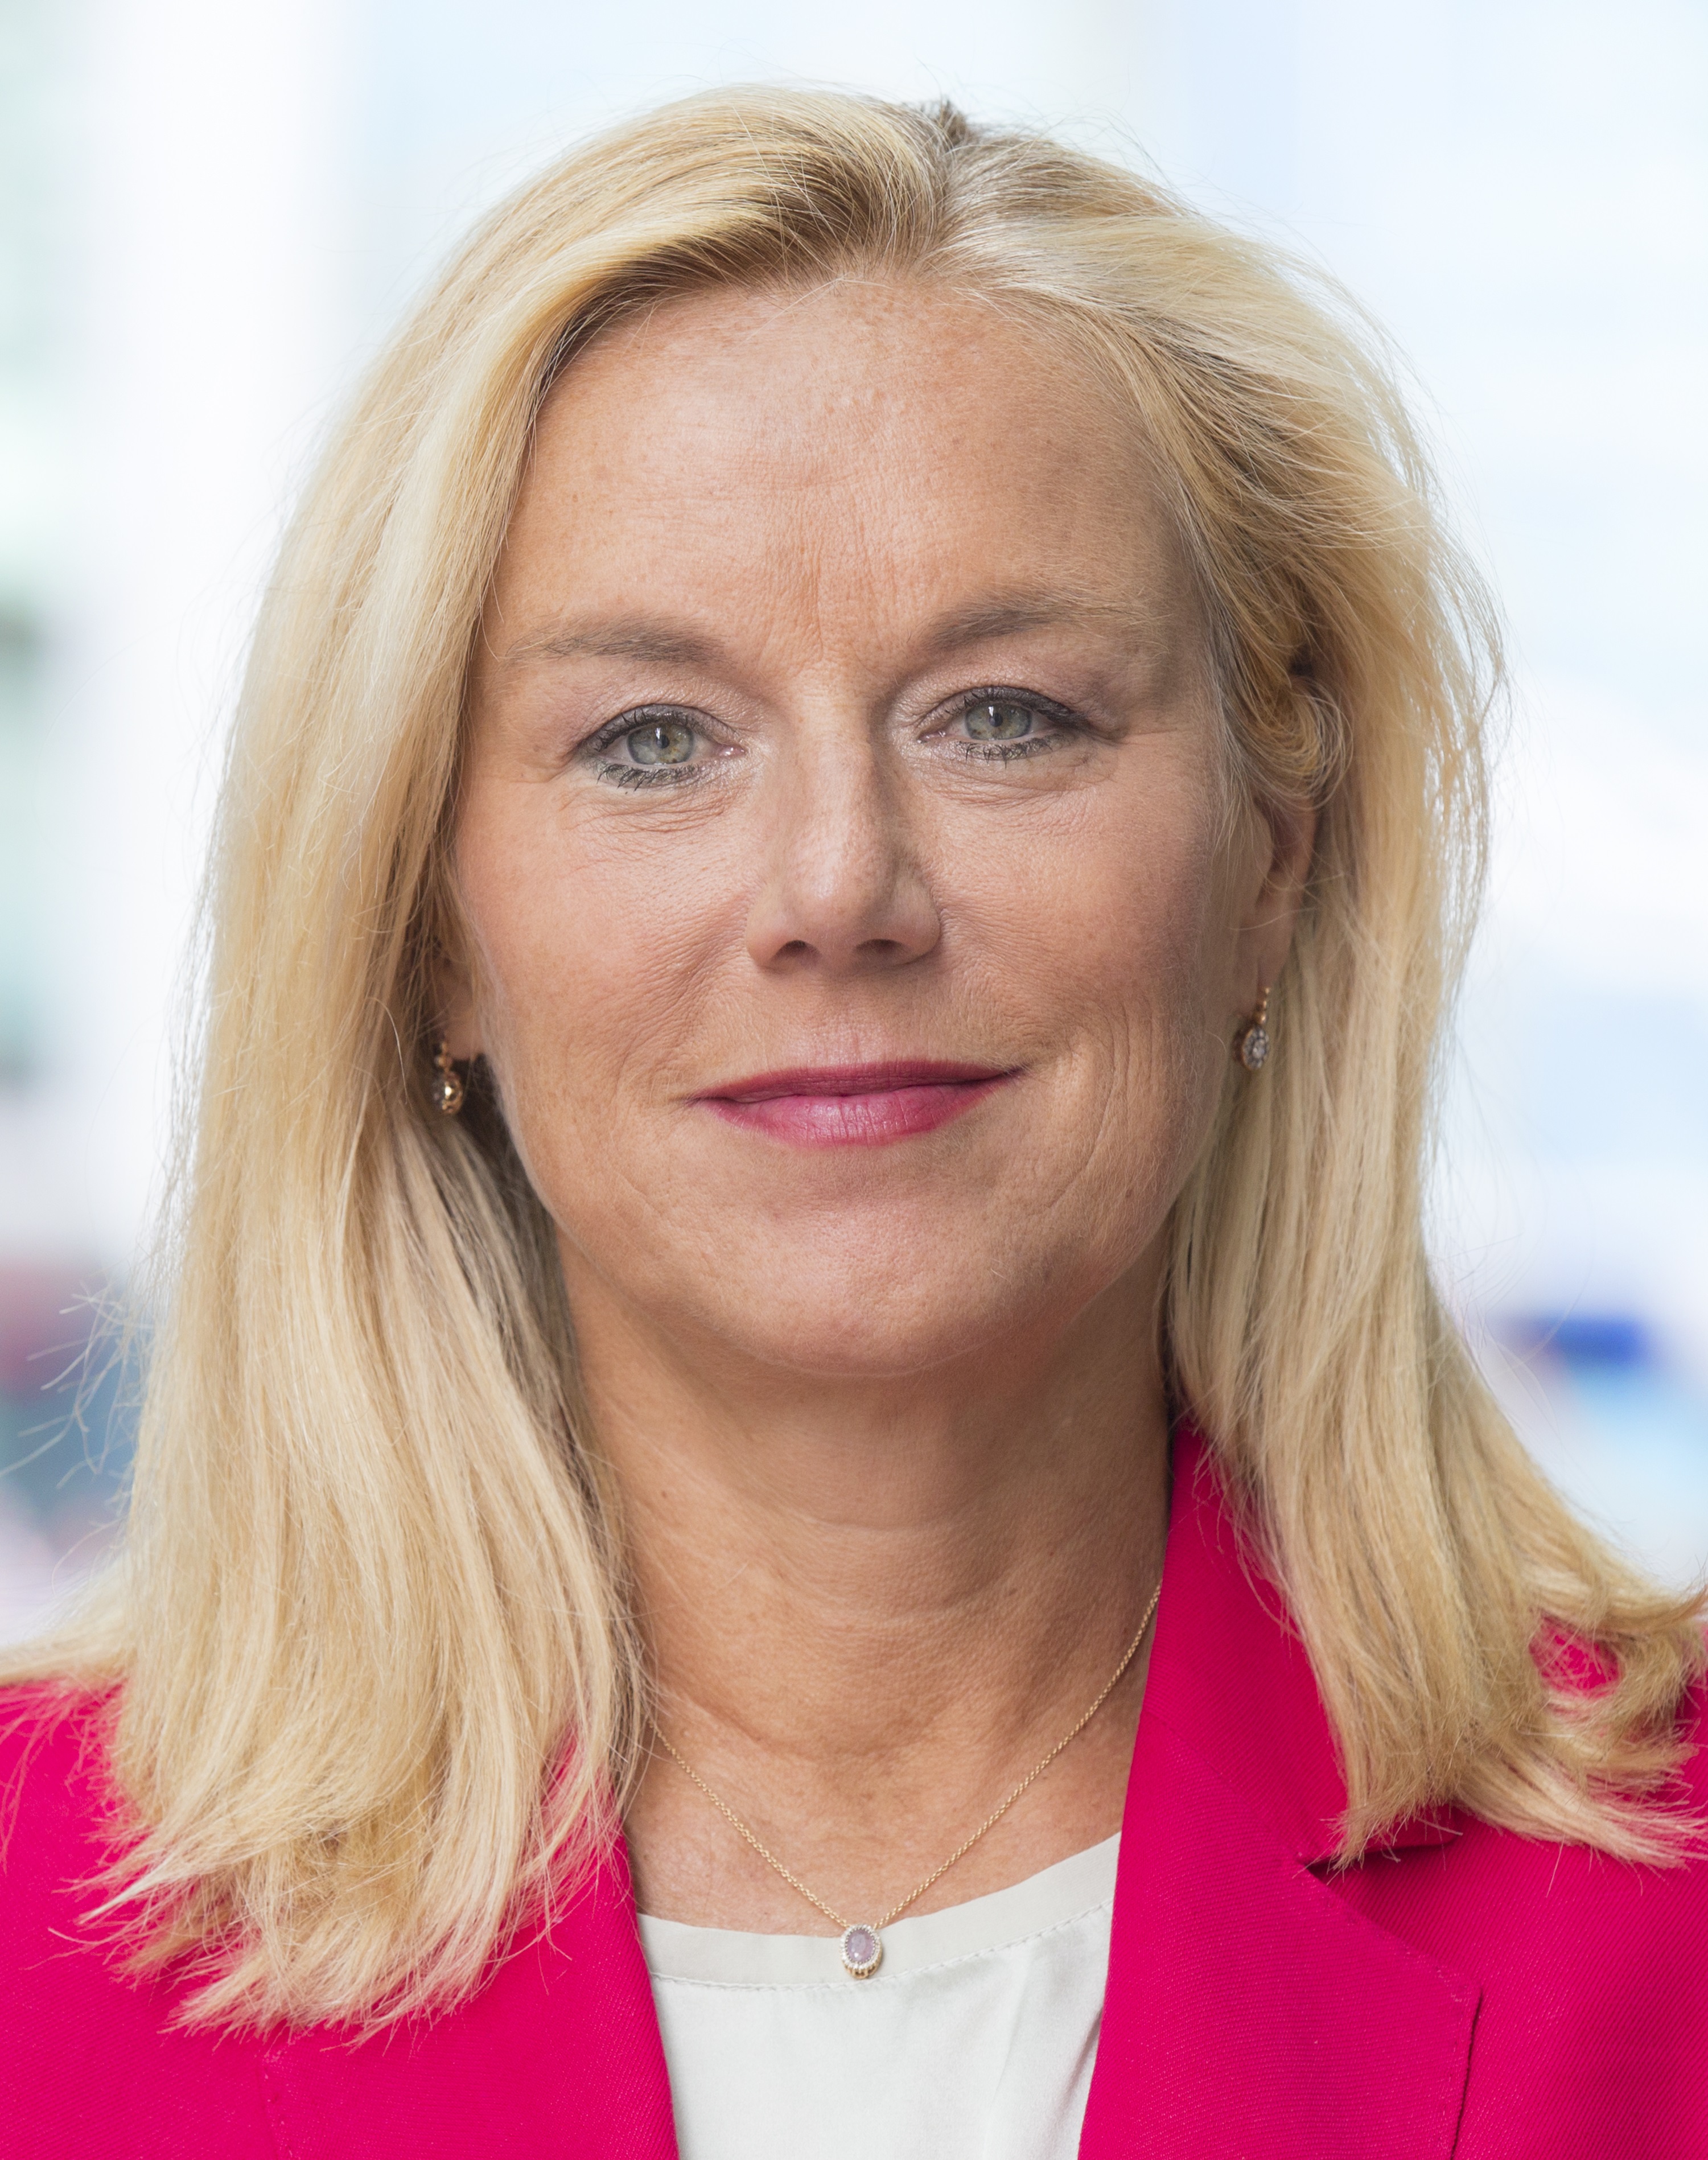 New Dutch finance minister Kaag tests positive for COVID-19 day before inauguration 